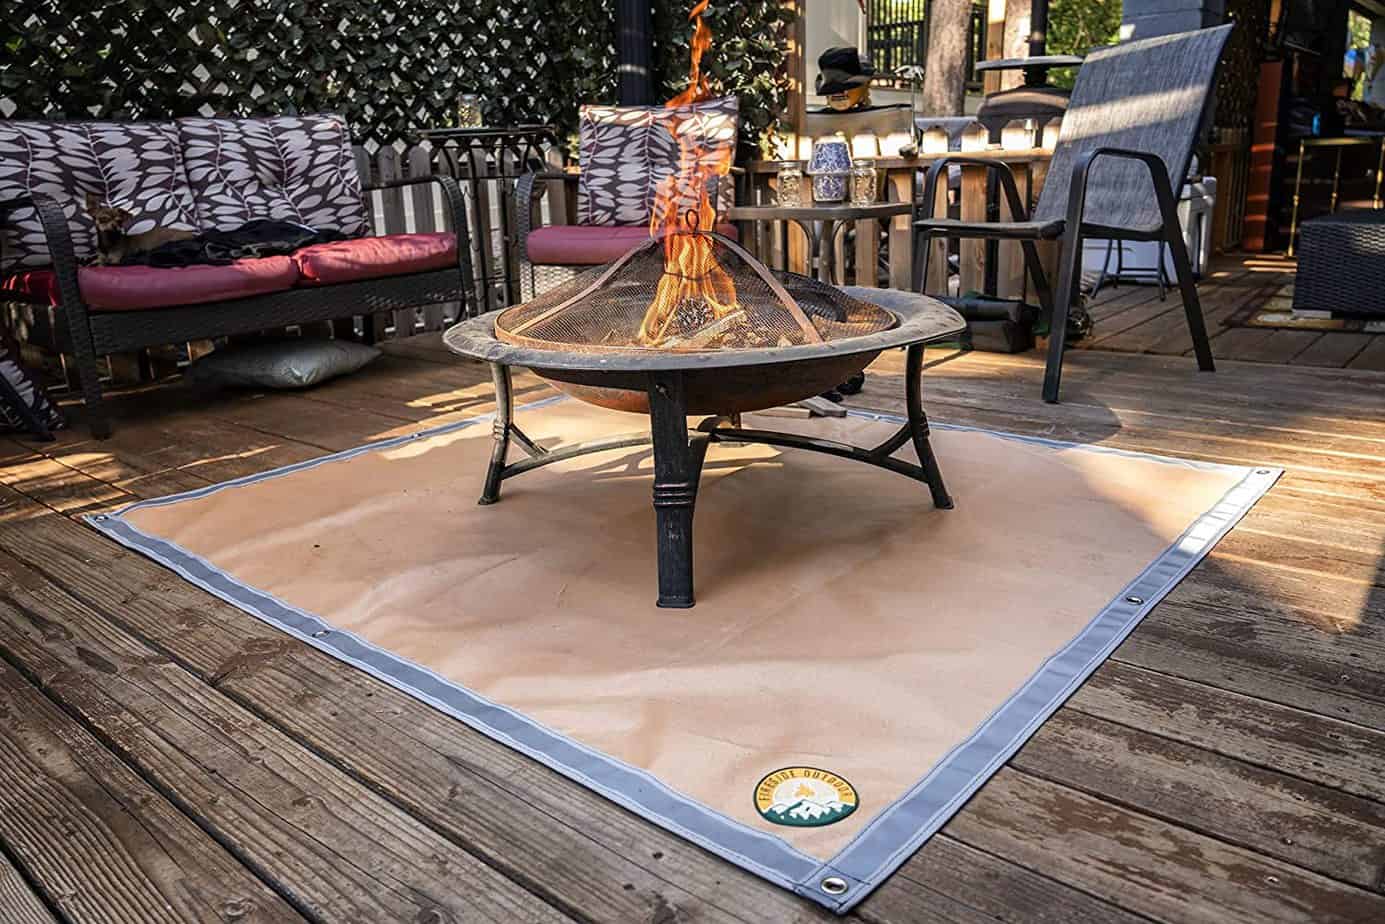 Protect Your Patio! What To Put Under A Firepit & Why - Diehard Backyard